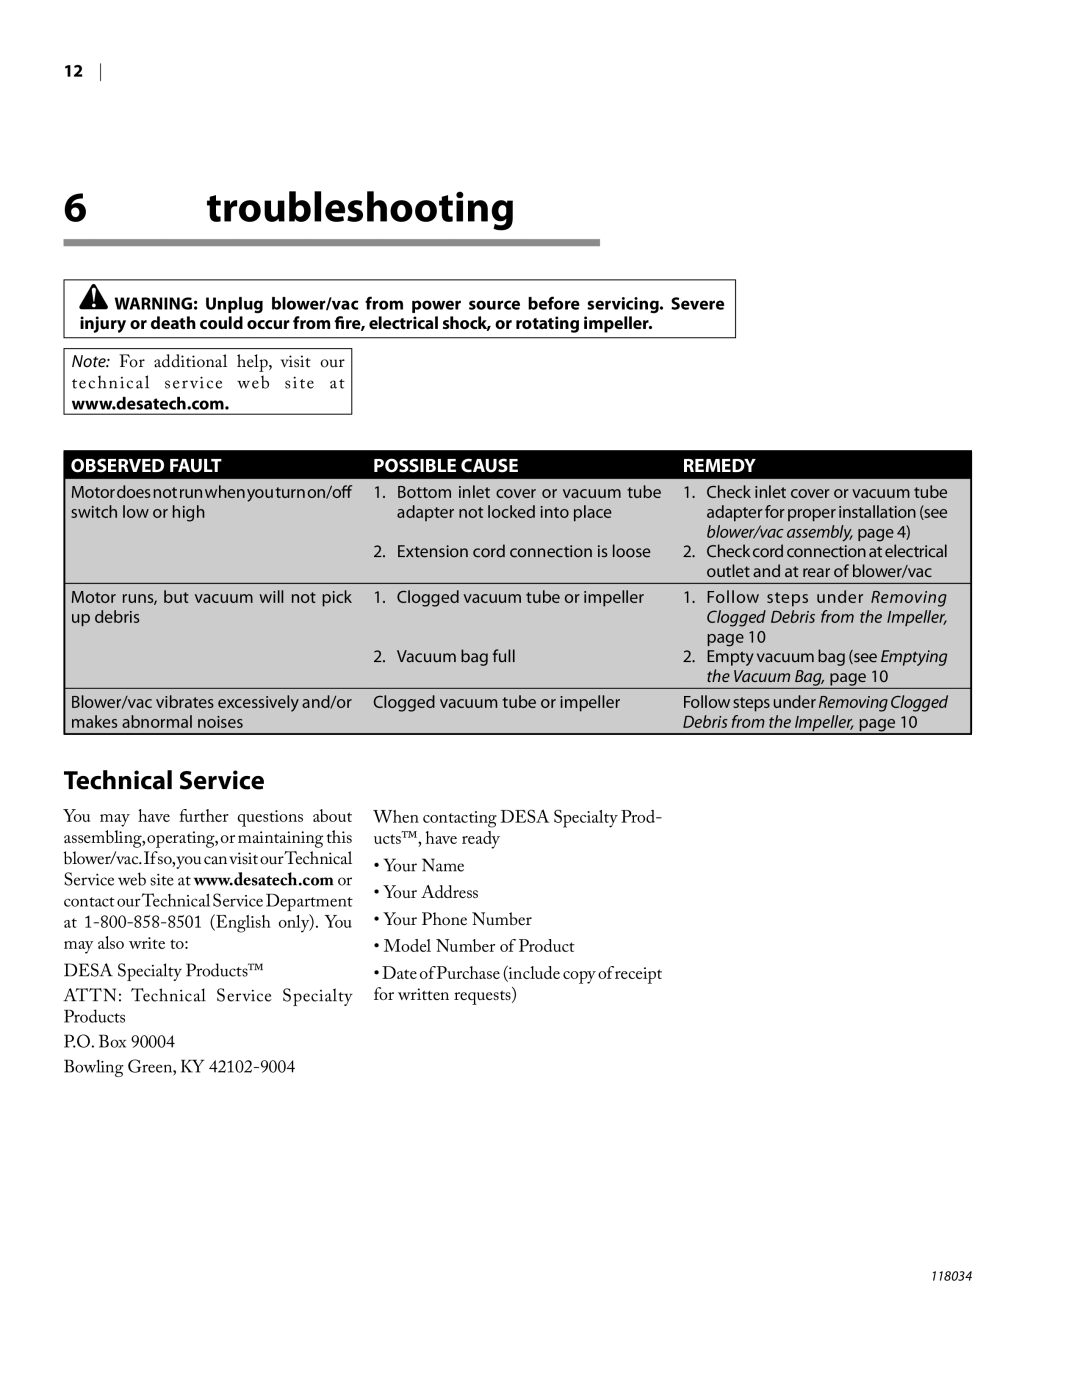 Remington BV12199A owner manual troubleshooting, Technical Service, Observed Fault, Possible Cause, Remedy 